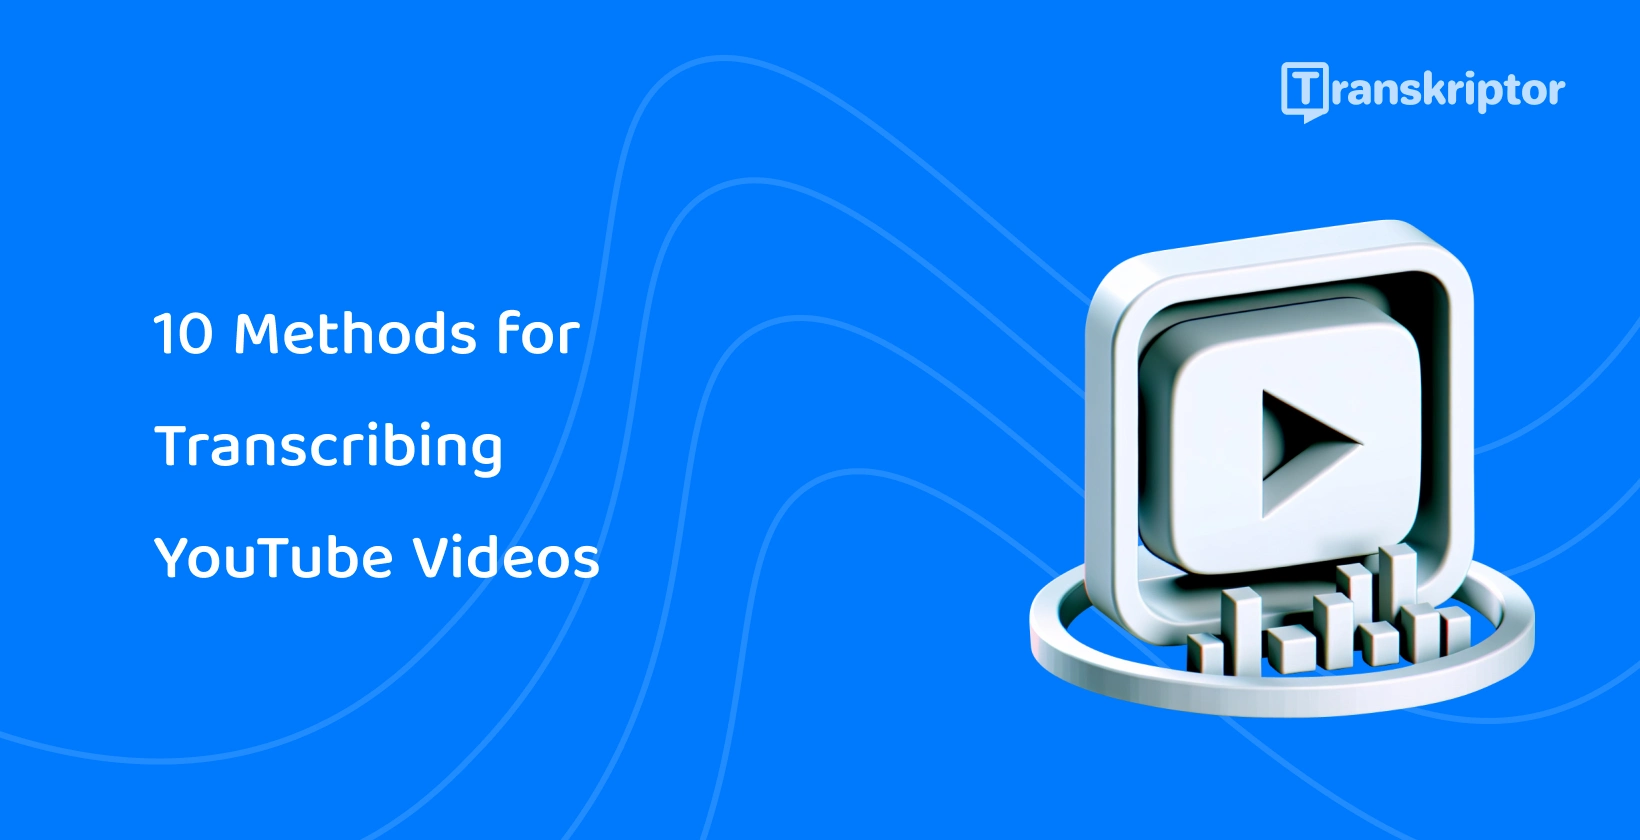 Play button and transcription visual illustrating methods for transcribing YouTube videos effectively.